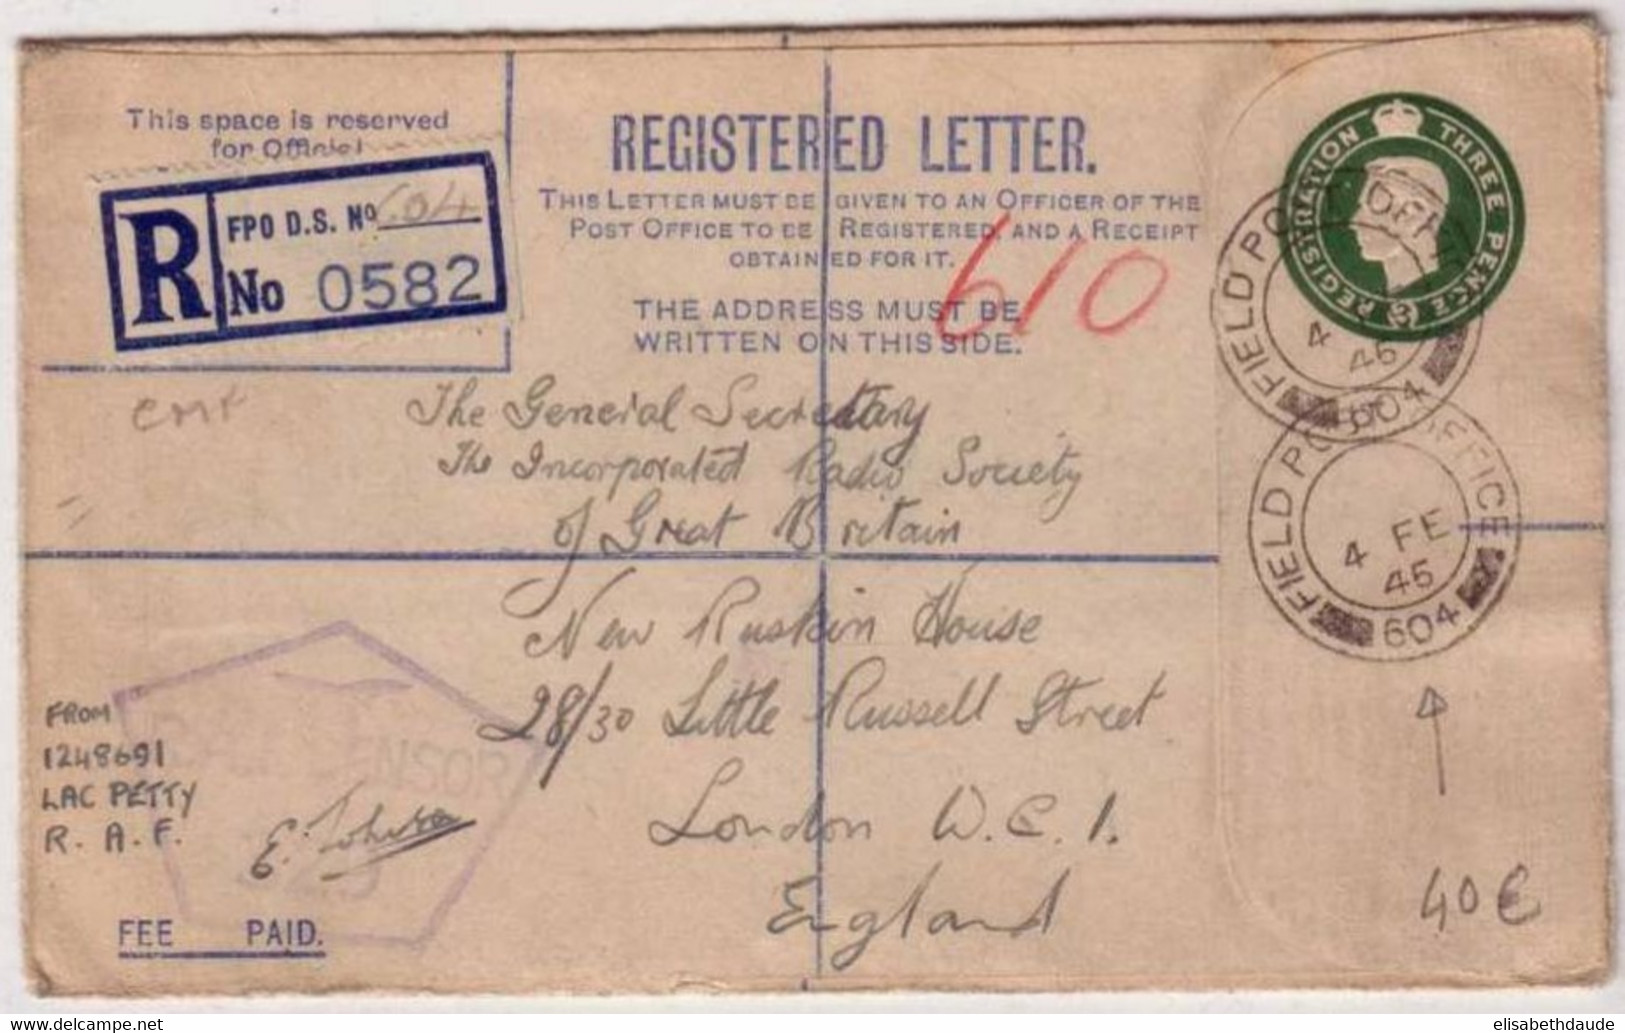 GUERRE 39/45 :1945  LETTRE RECOMMANDEE MILITAIRE (FIELD POST OFFICE N°604)   - CENSURE RAF- - Storia Postale